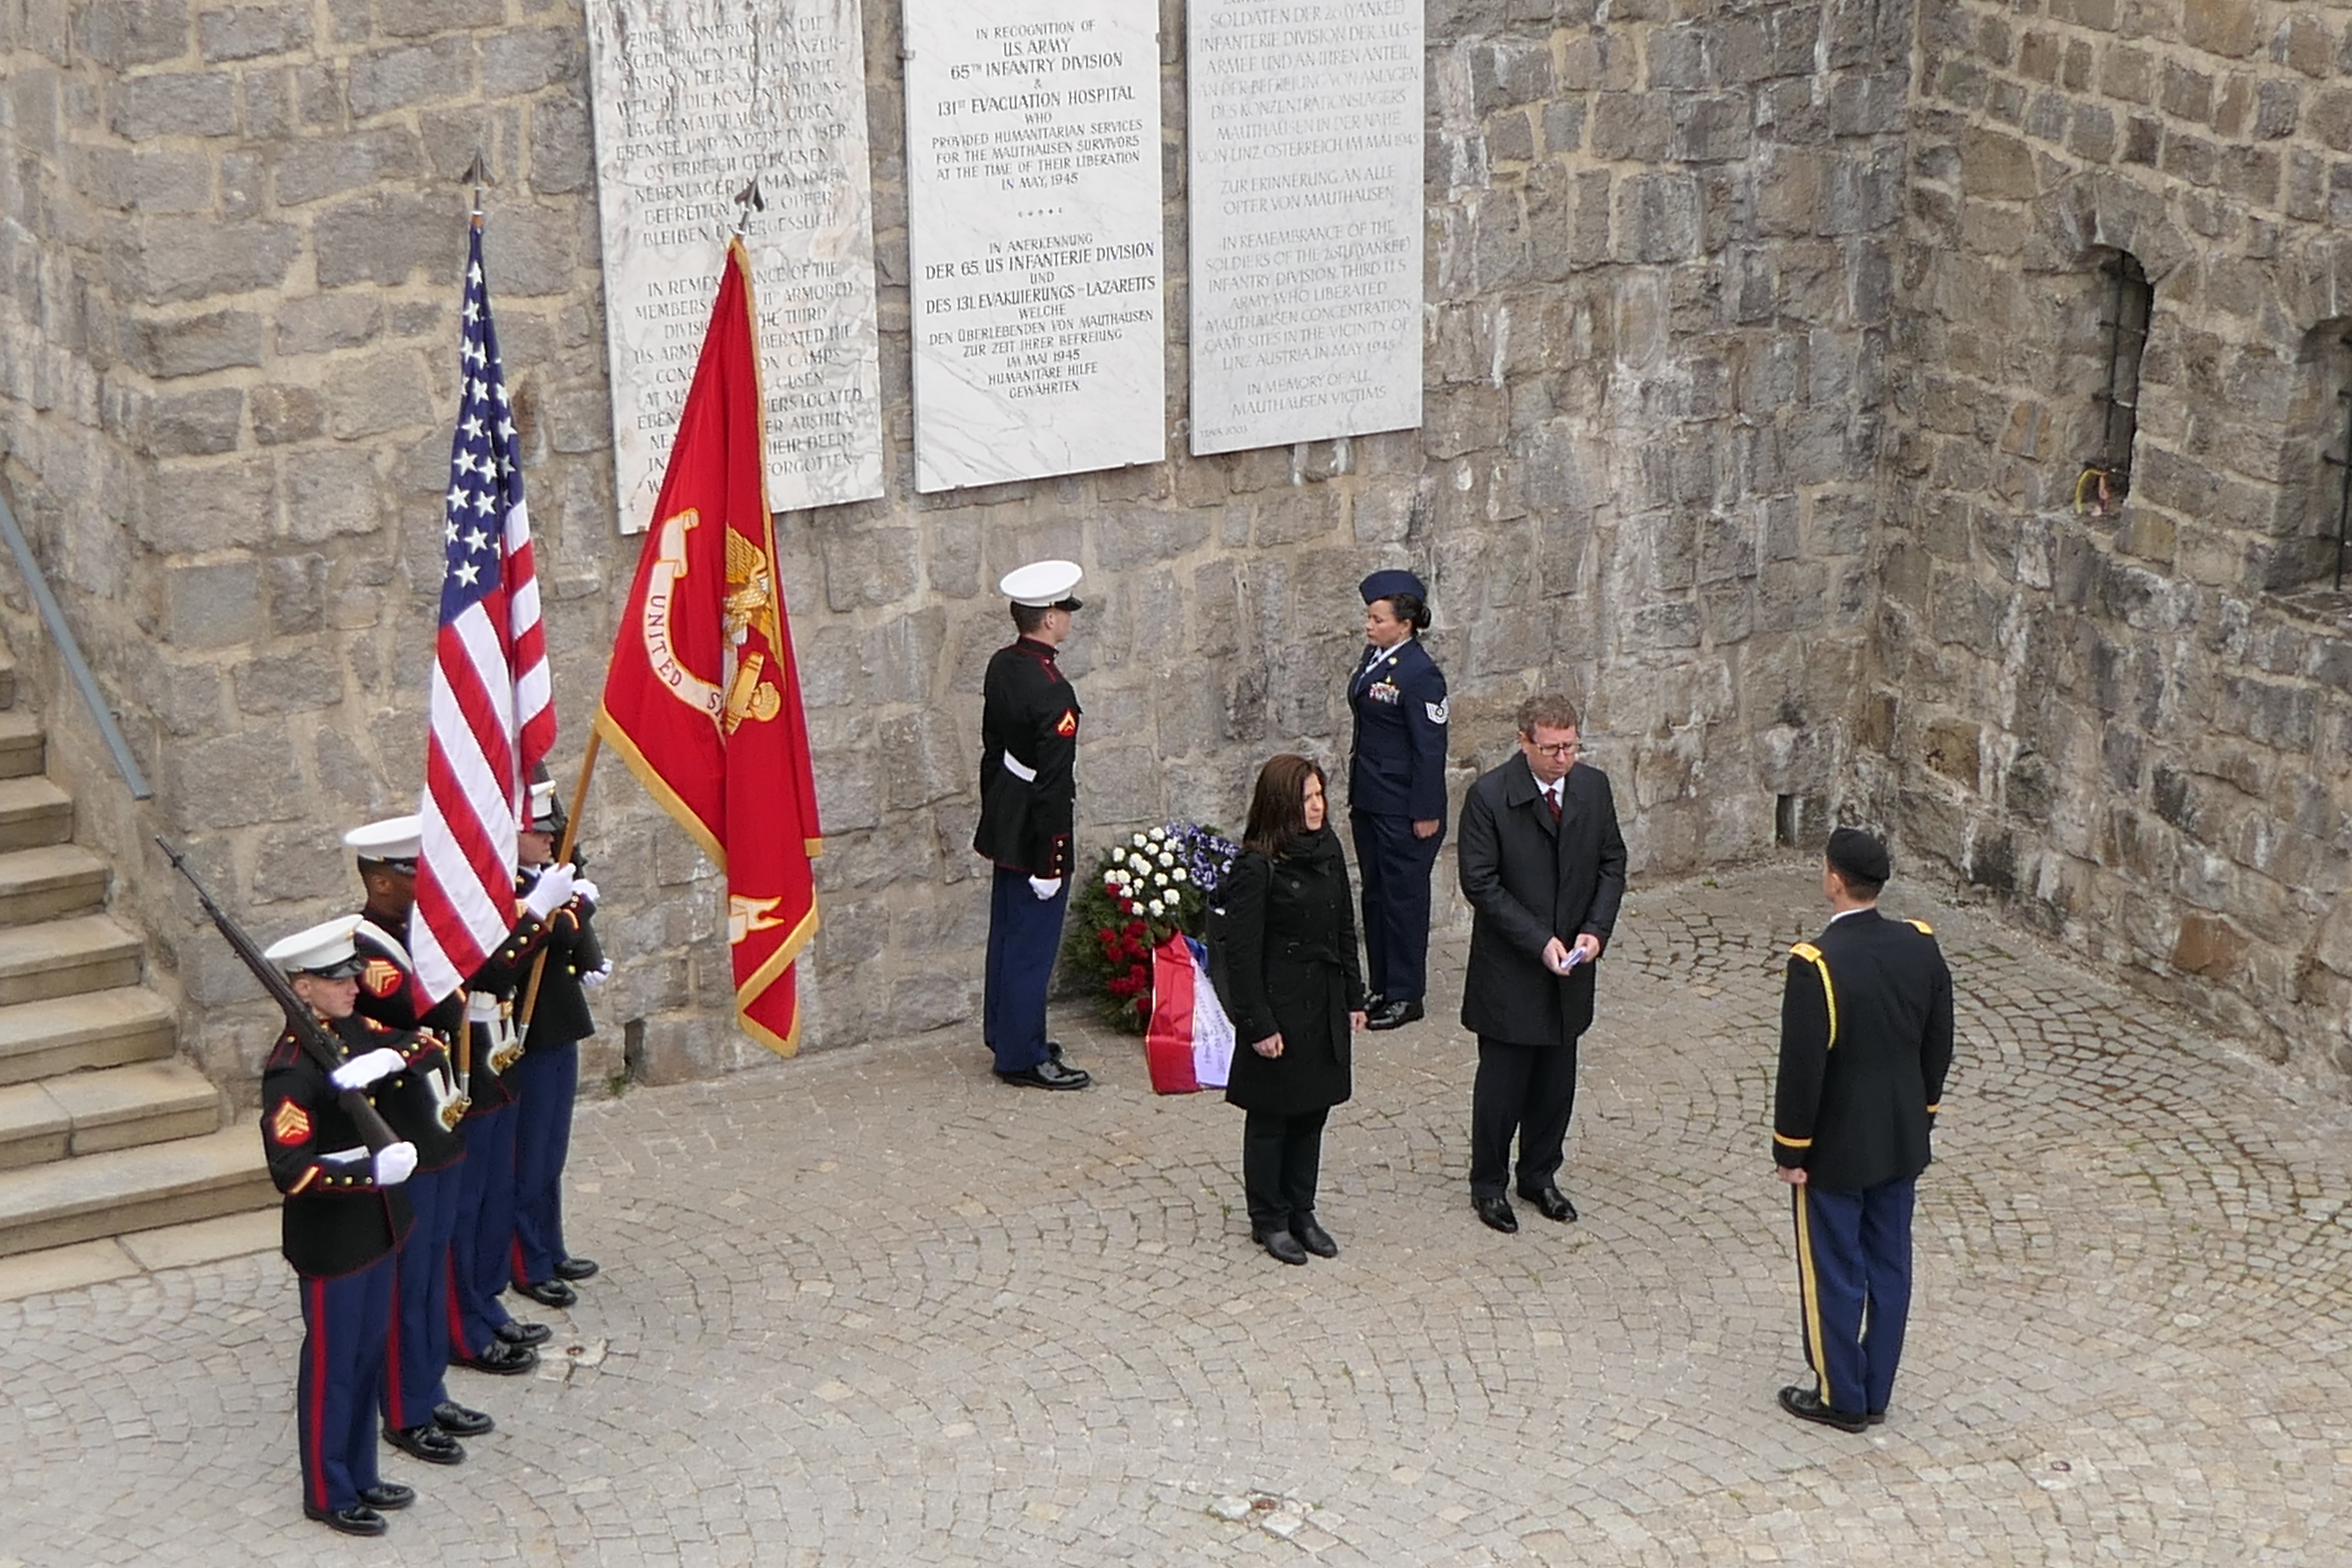 Wreath-laying commemoration of US-liberation divisions